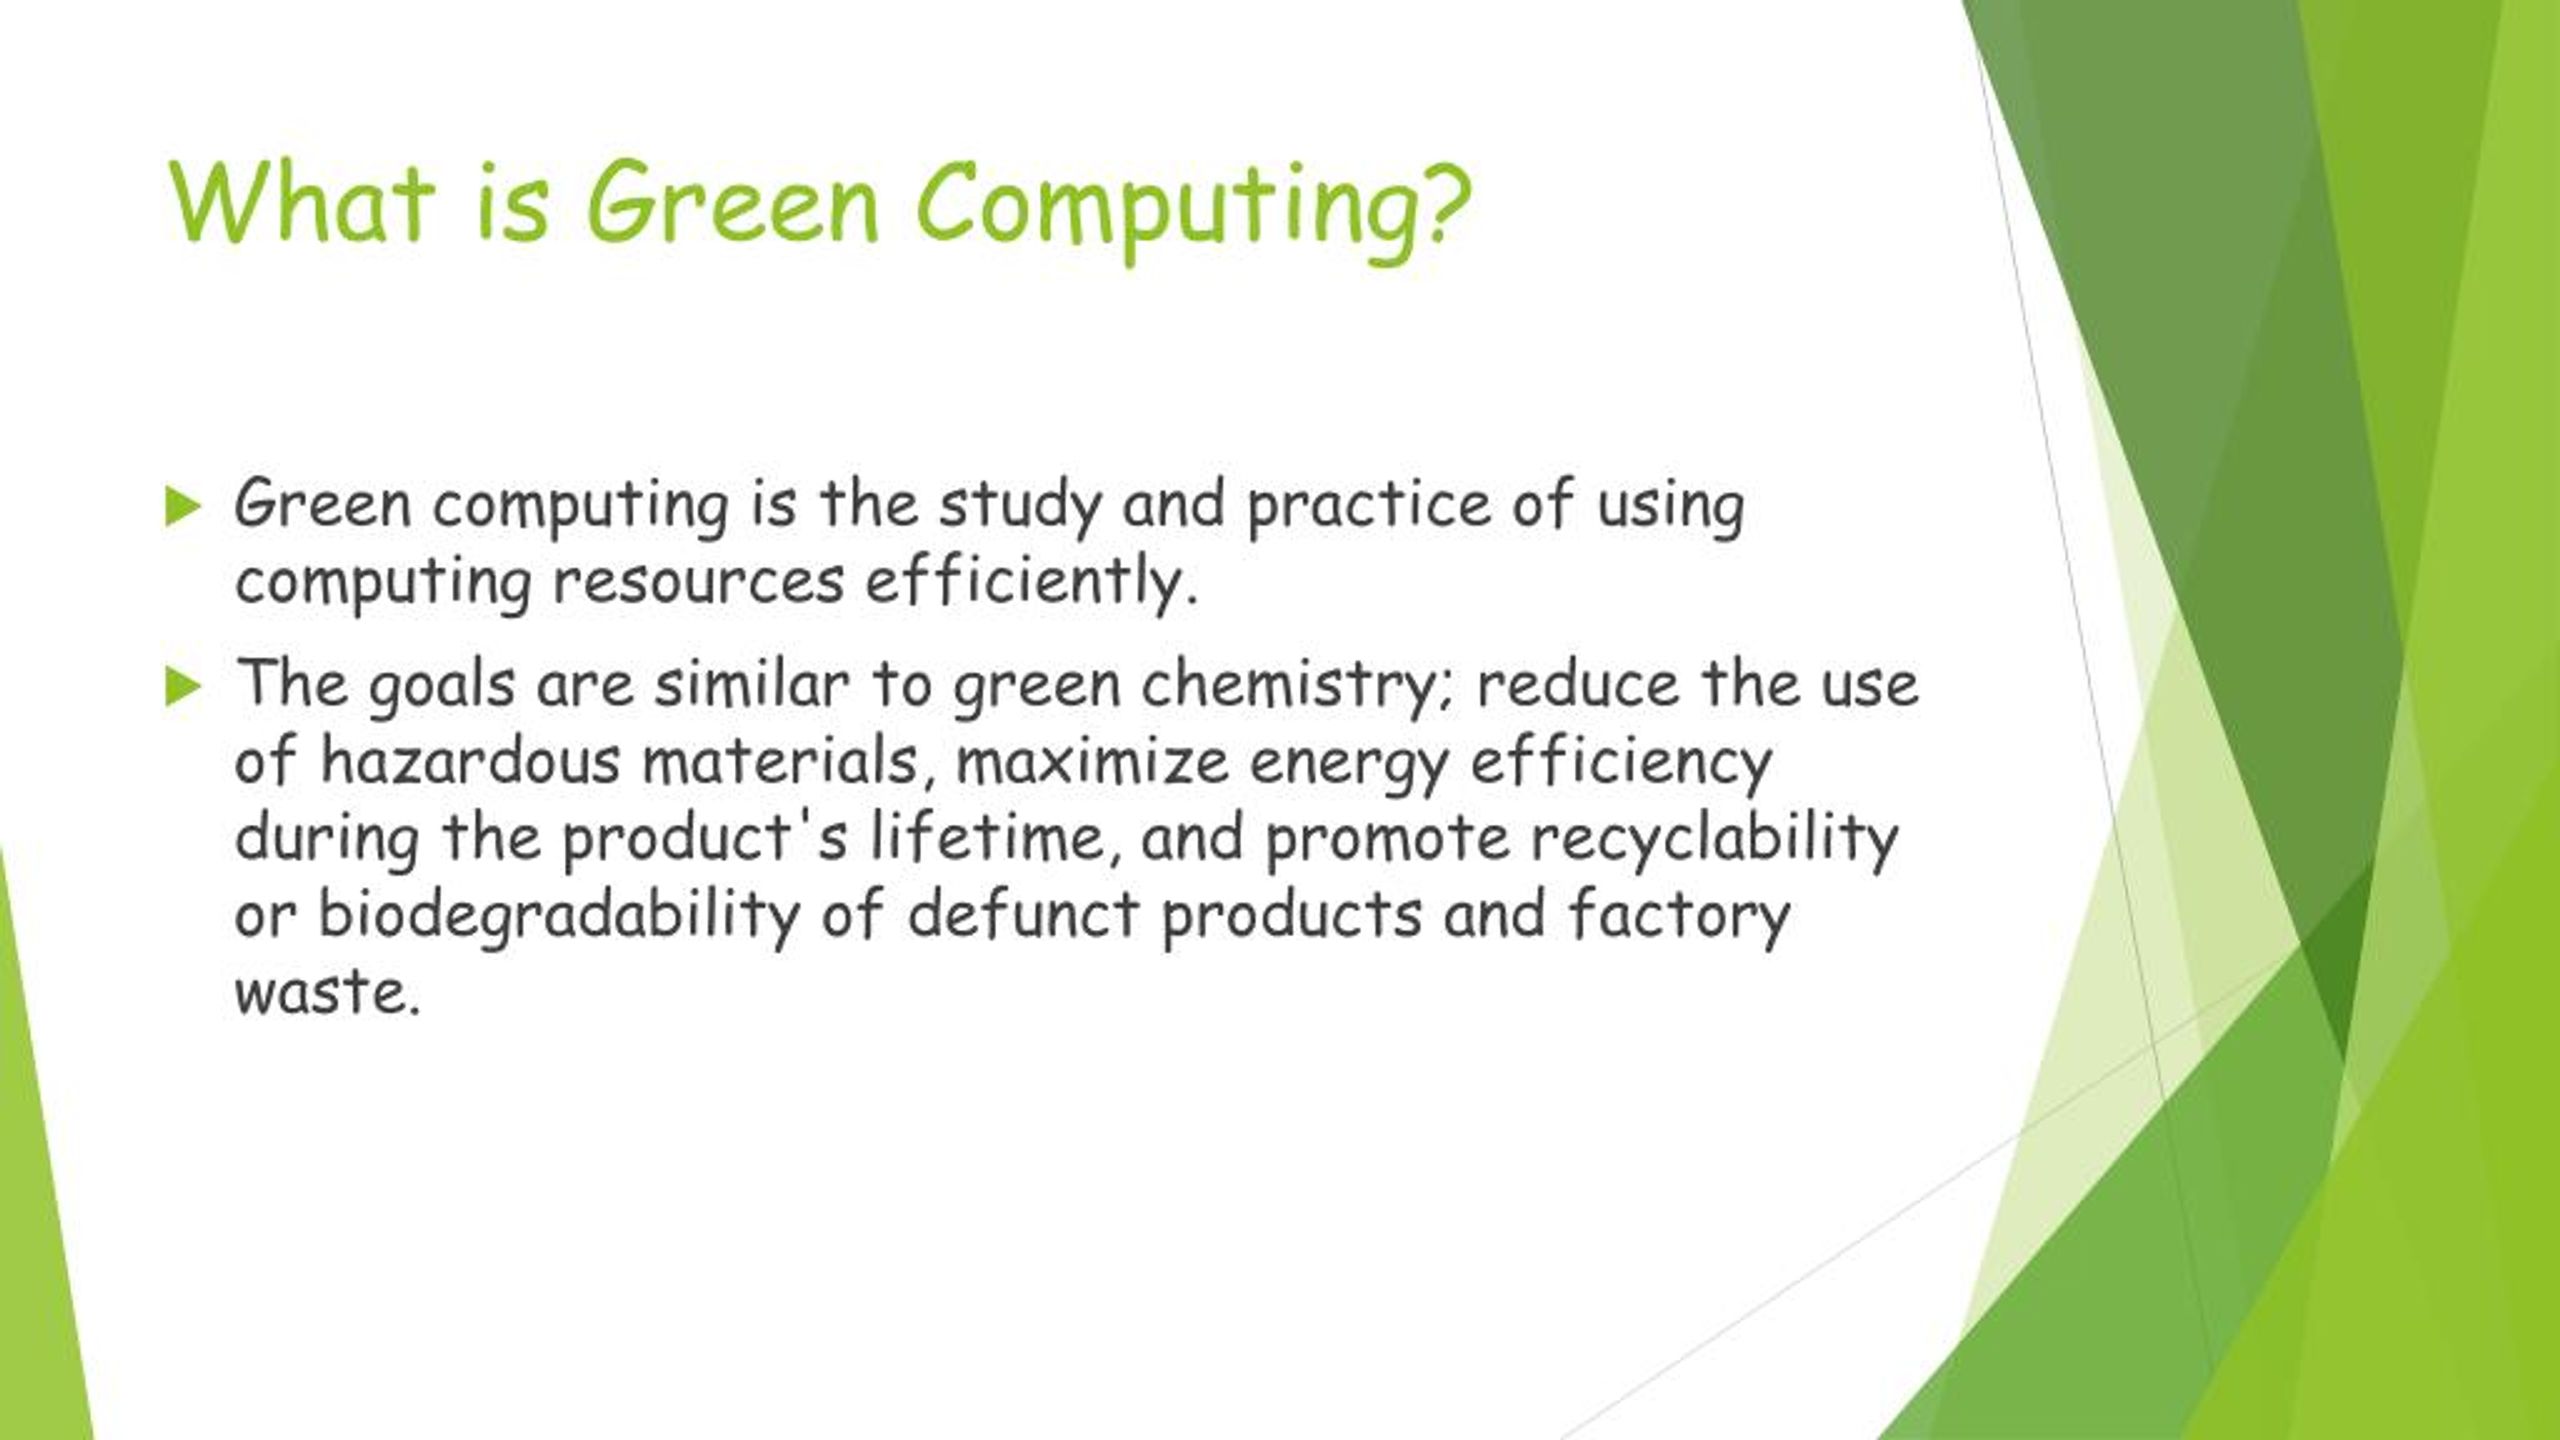 literature review of green computing